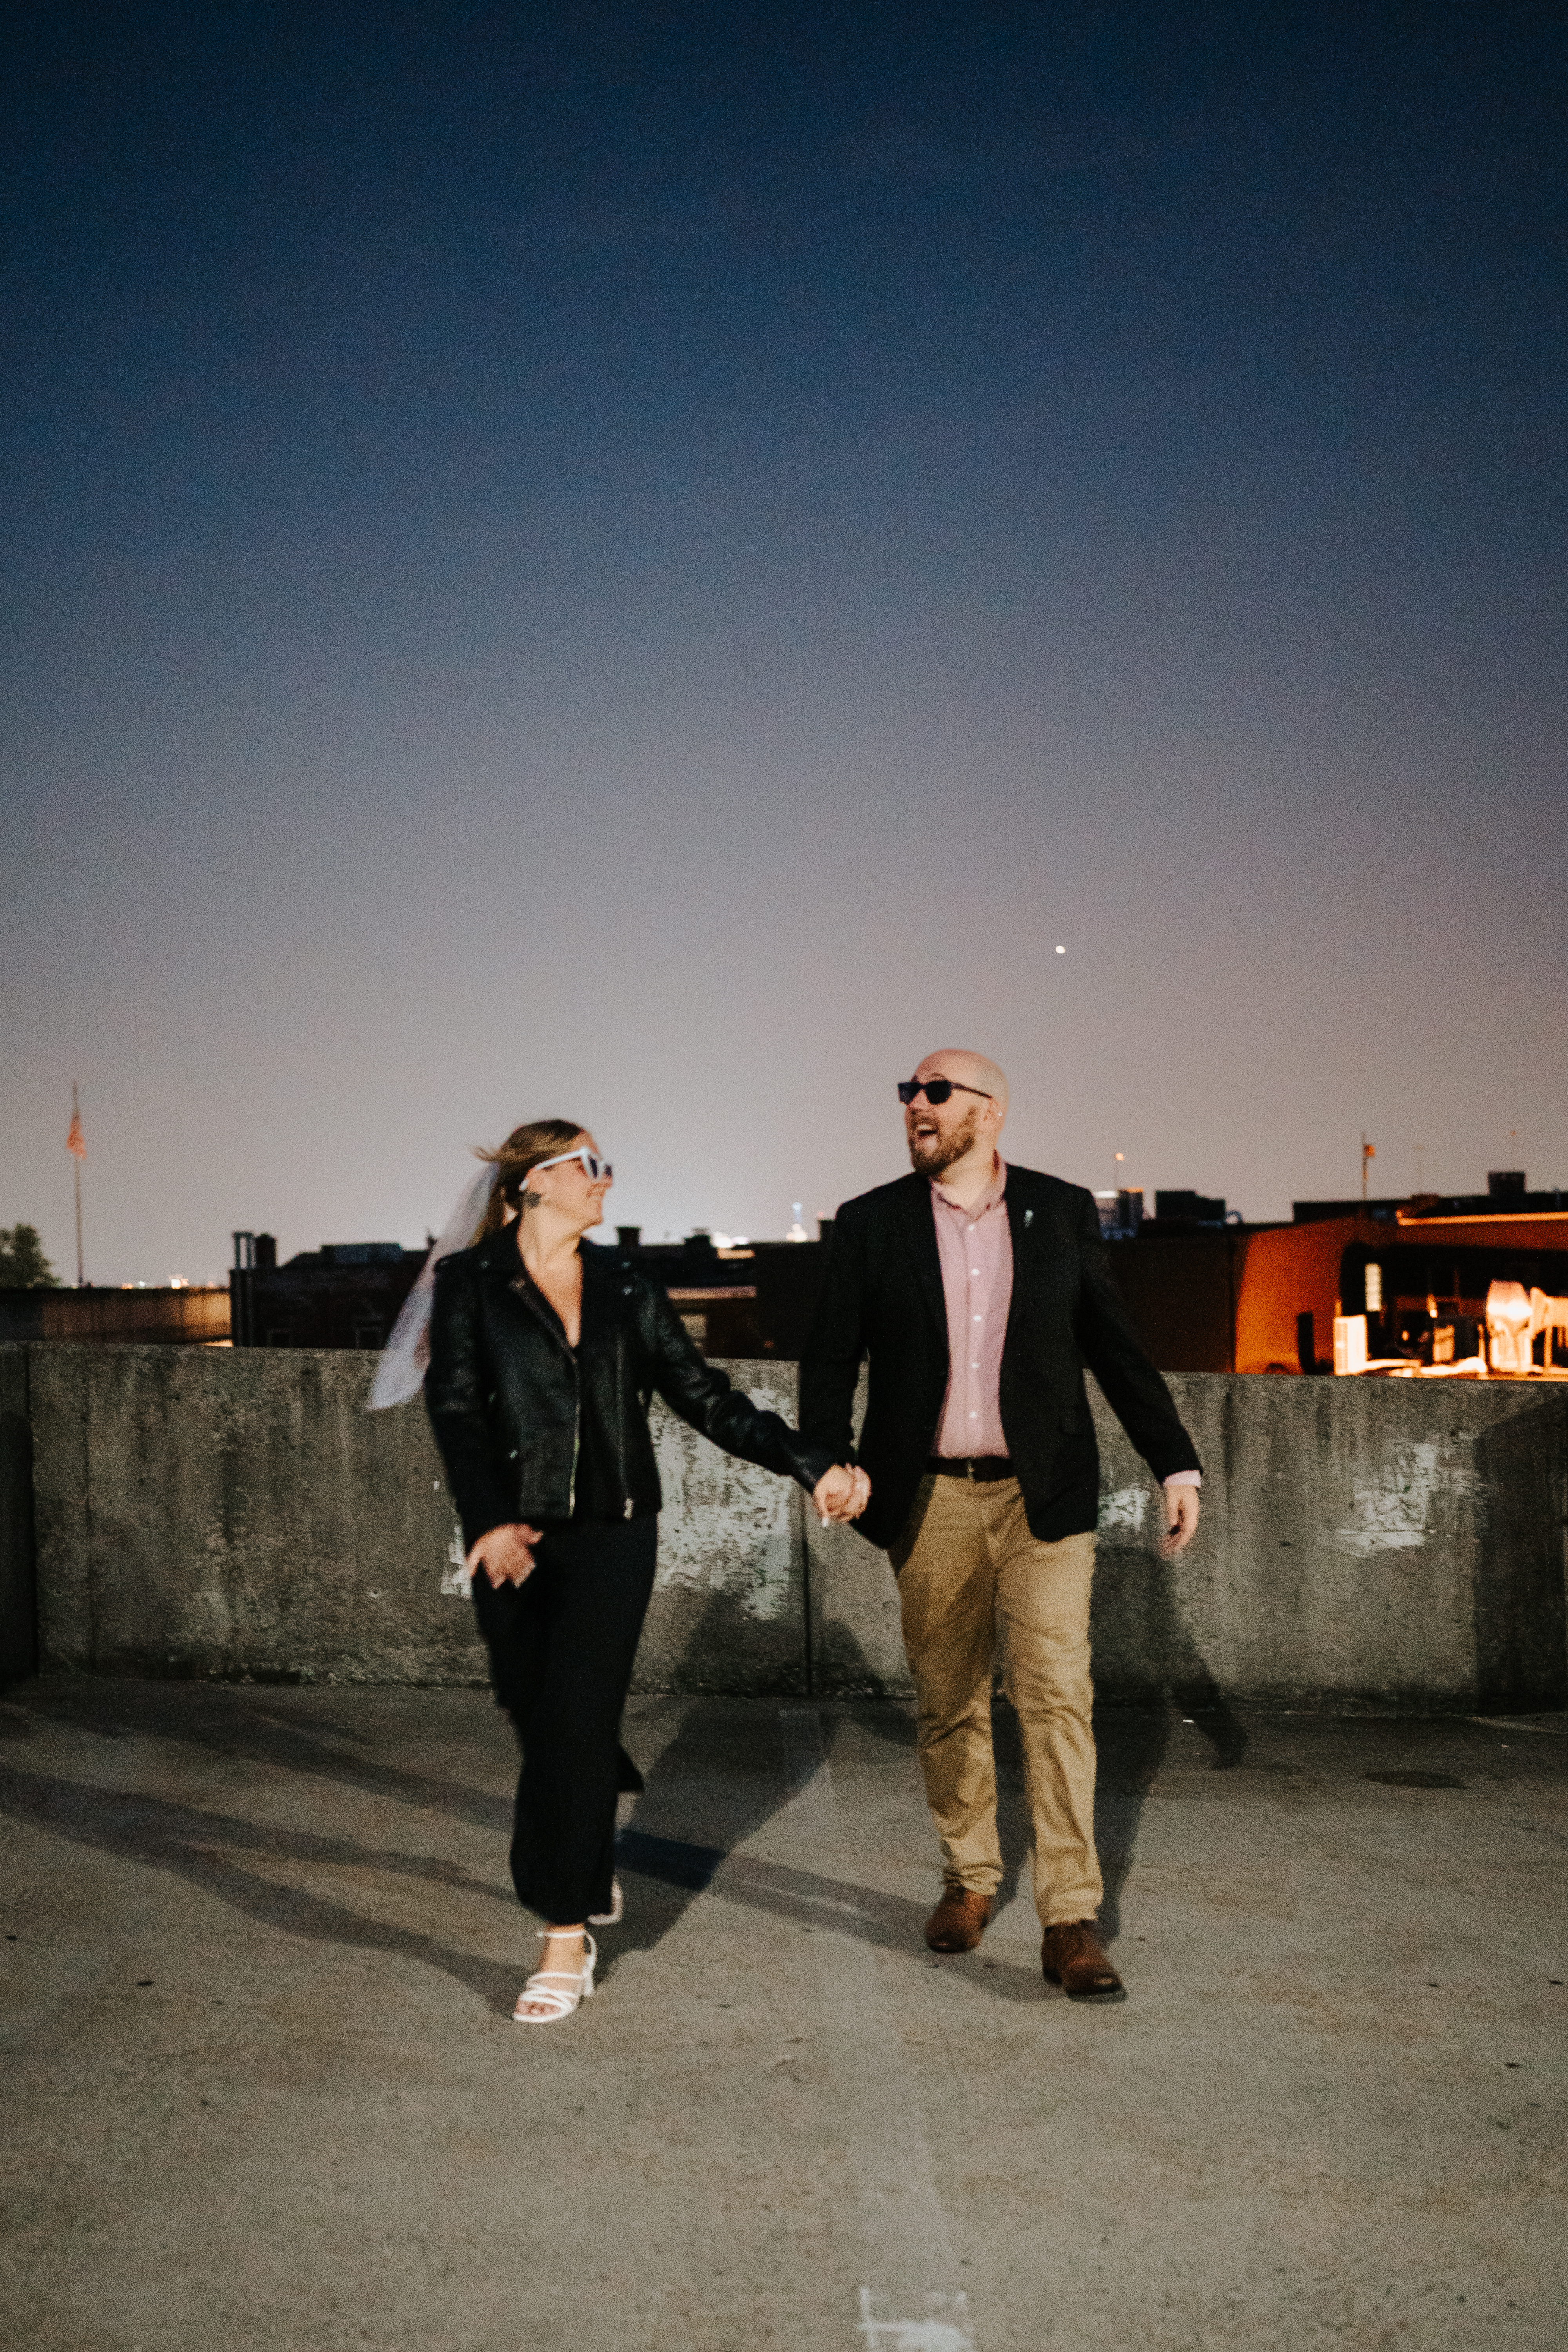 Nighttime Rooftop Engagement Photos by Maryland Wedding Photographer